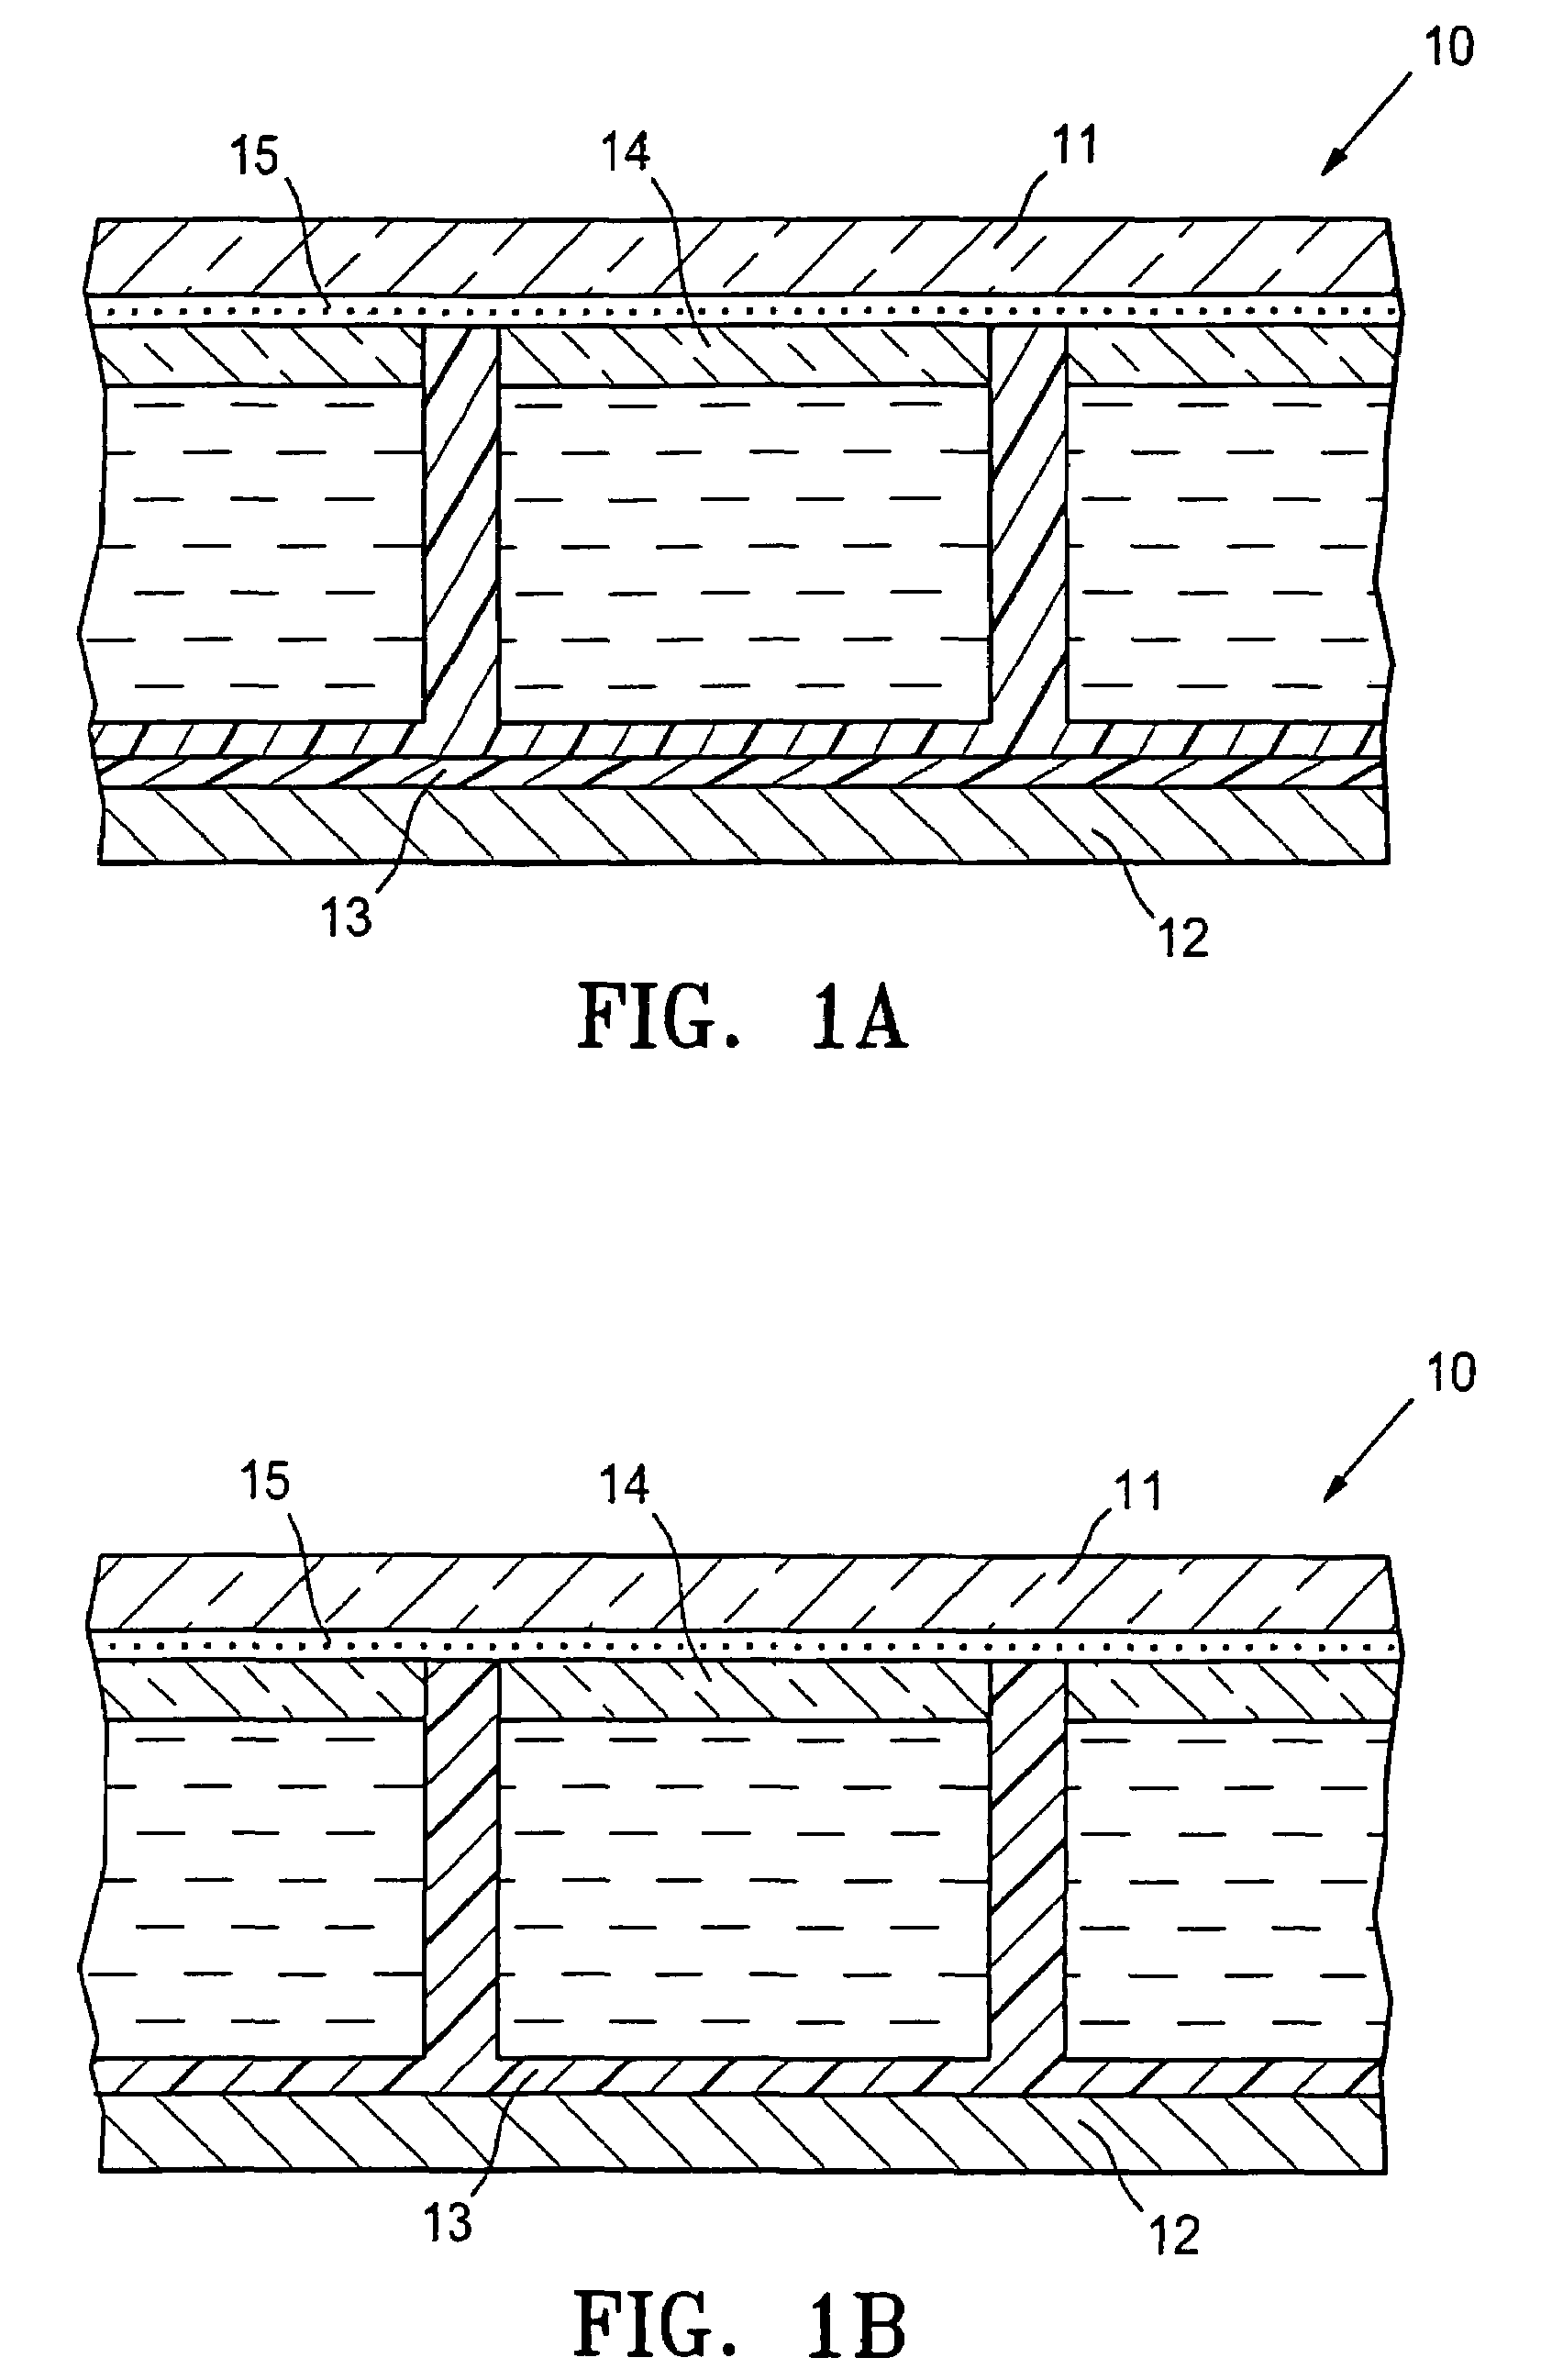 Modification of electrical properties of display cells for improving electrophoretic display performance